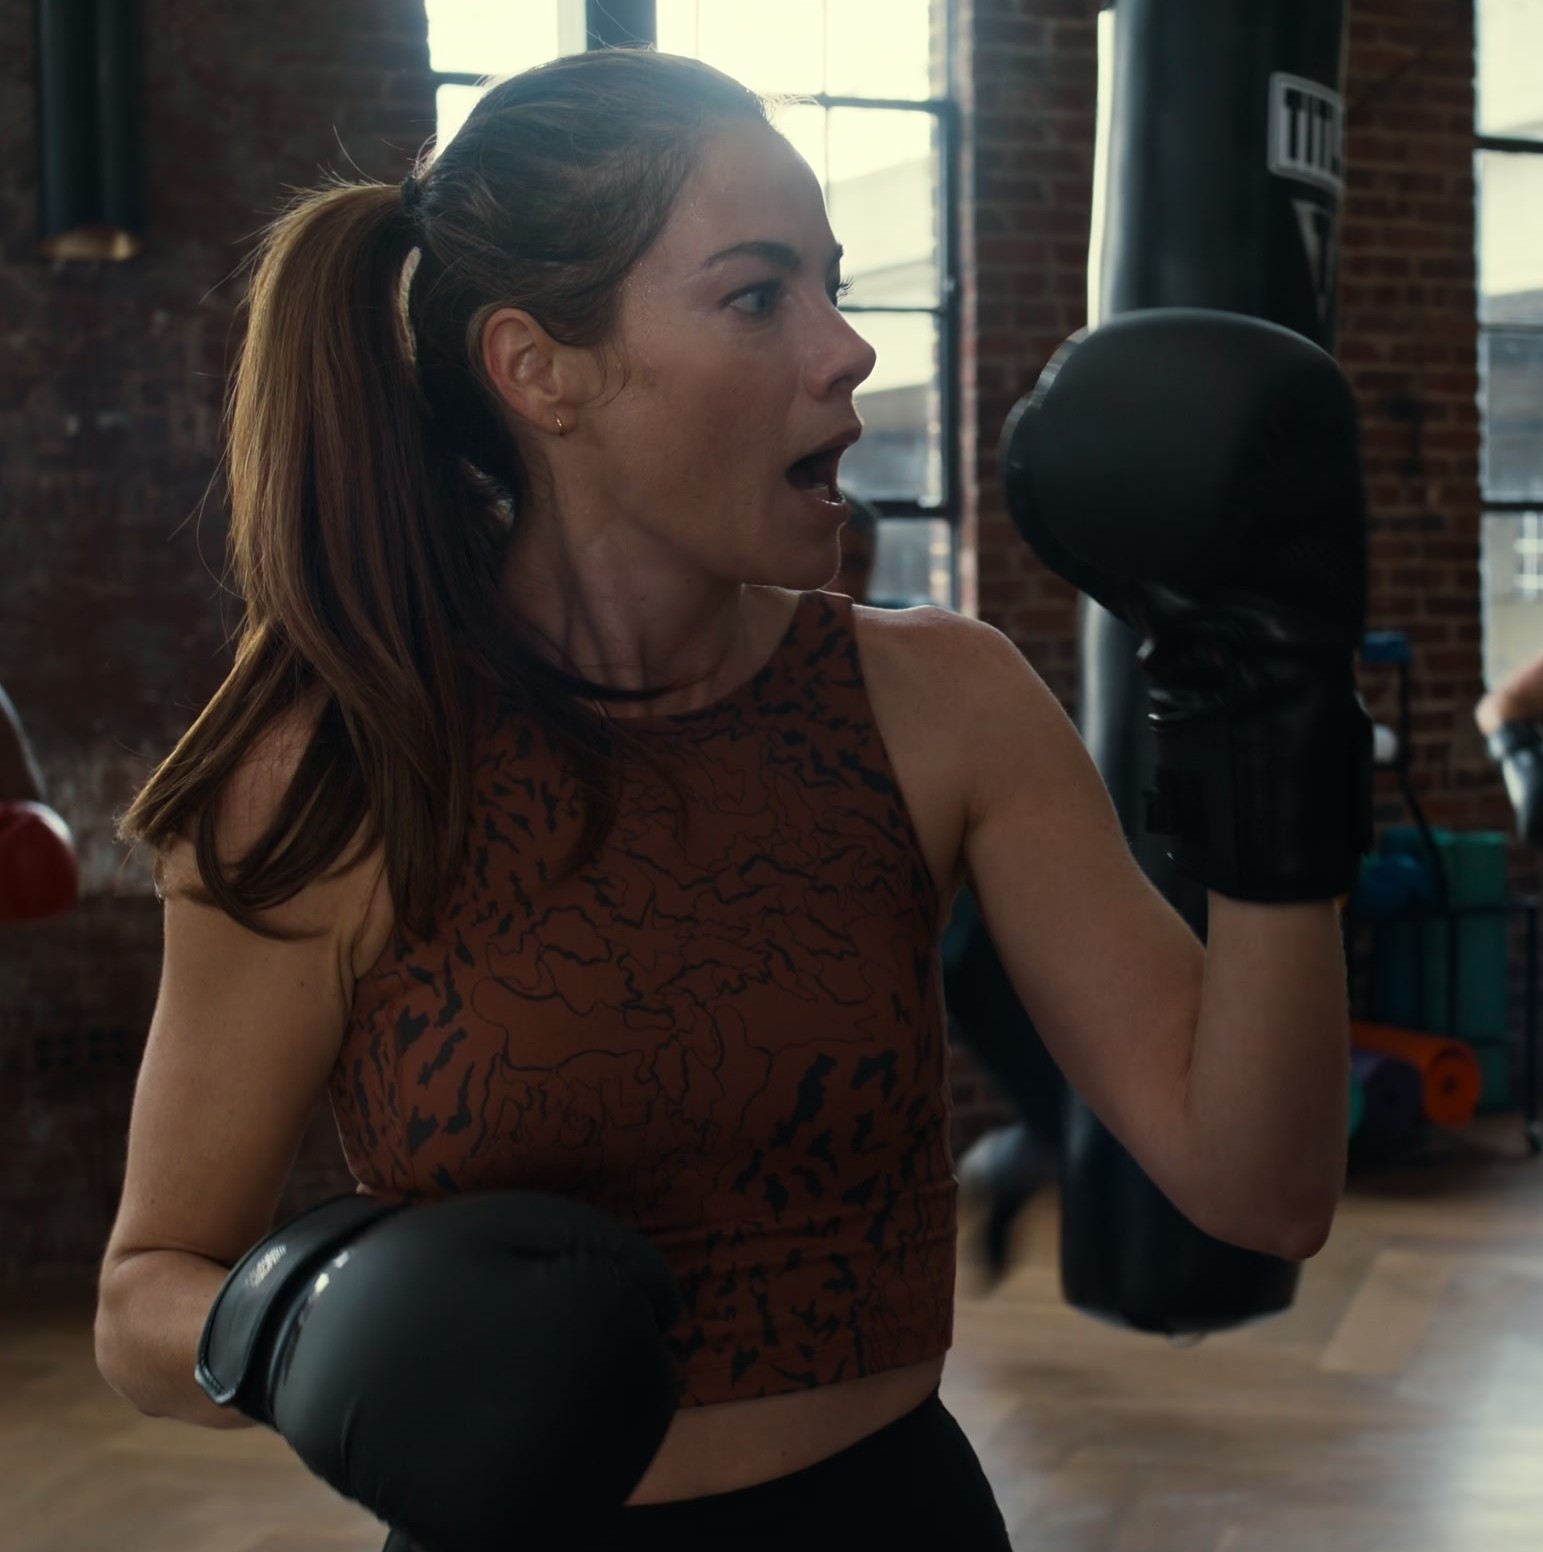 Worn on The Family Plan (2023) Movie - High Neck Tank Top of Michelle Monaghan as Jessica Morgan